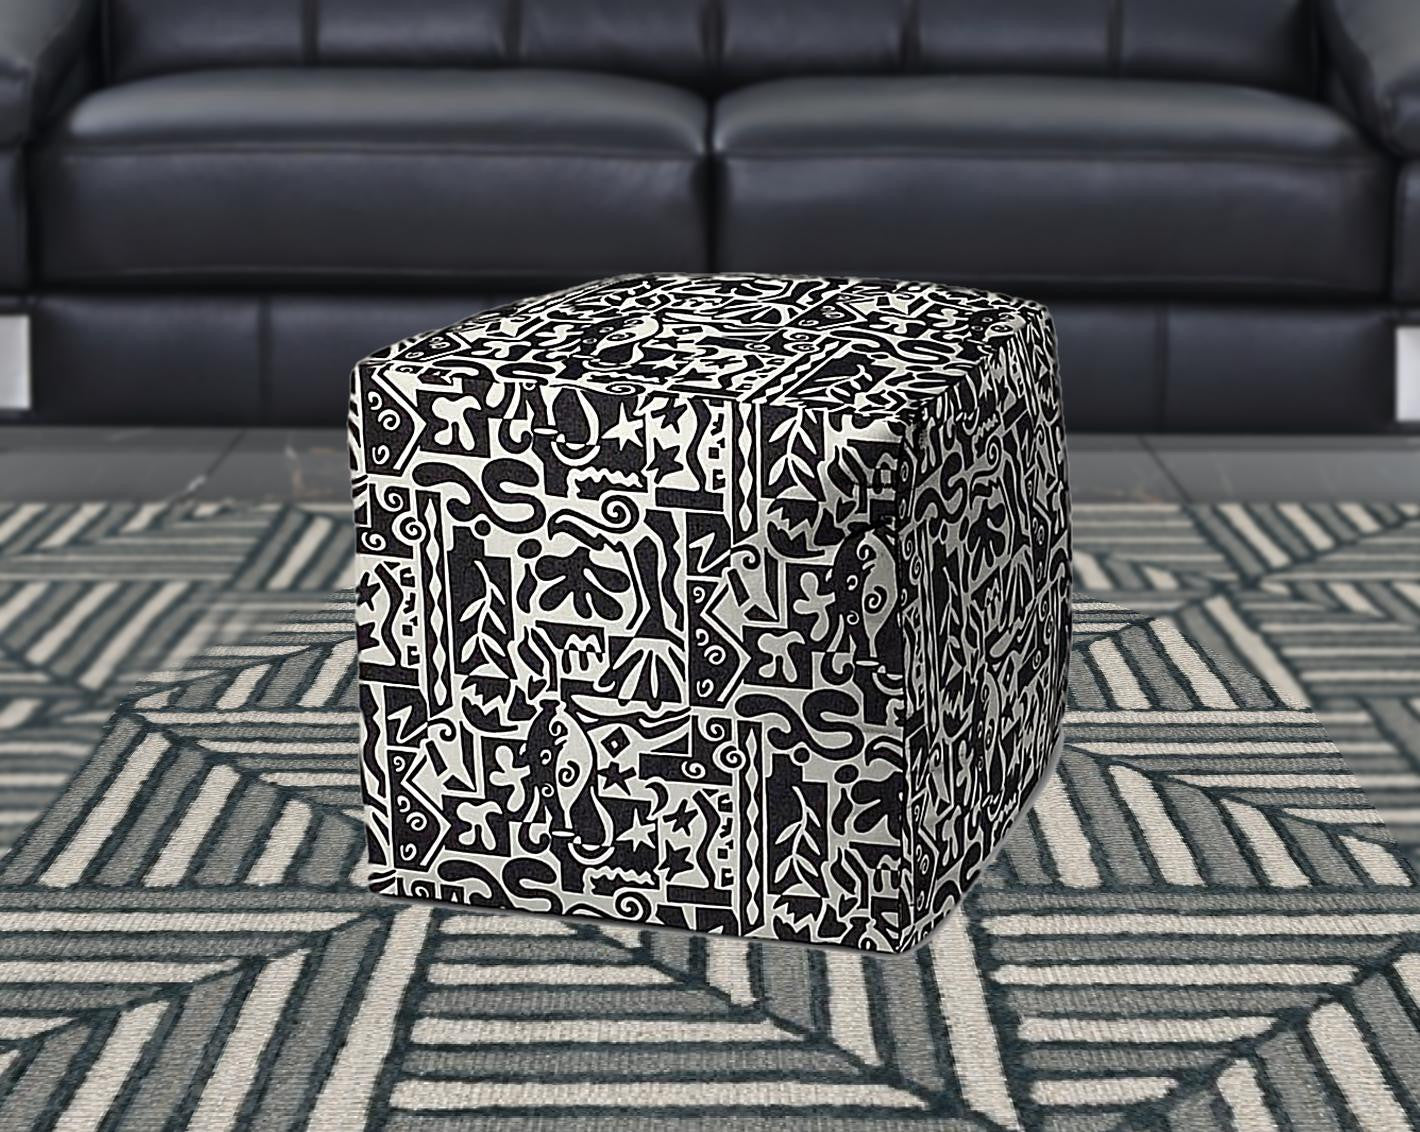 17" Black Polyester Cube Geometric Indoor Outdoor Pouf Ottoman